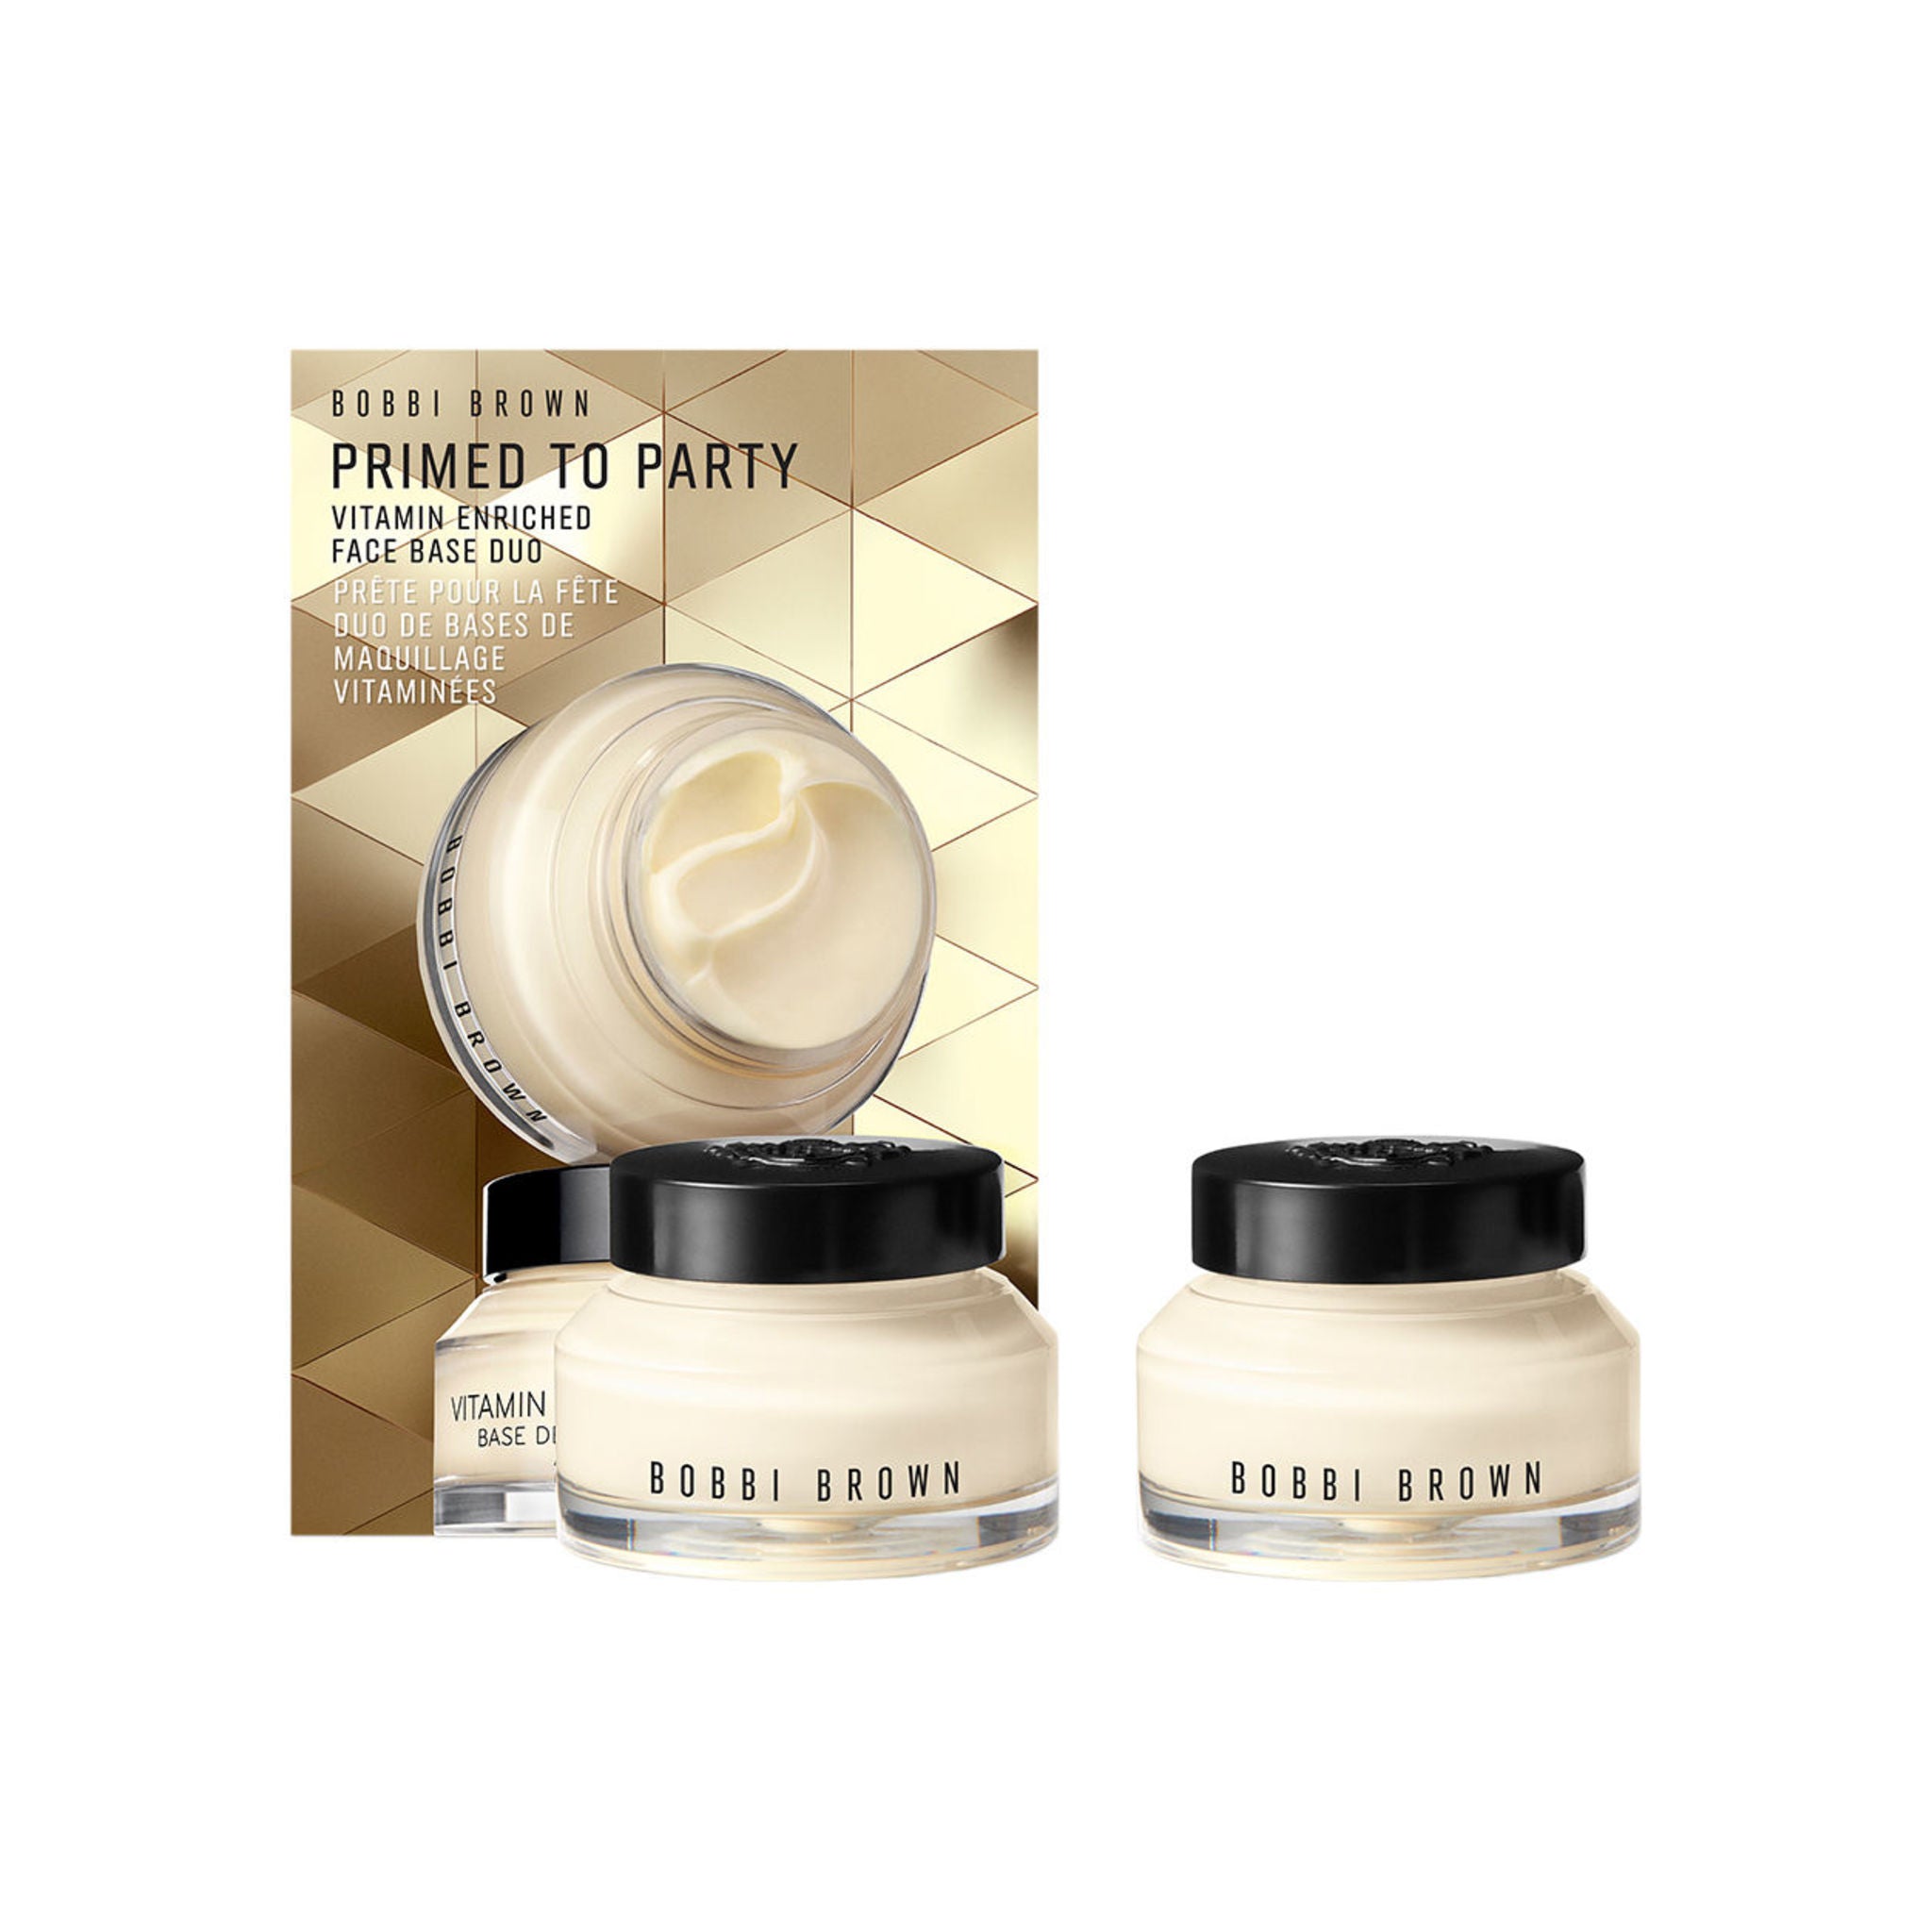 Bobbi Brown Vitamin Enriched Face Base Primer Moisturizer Duo With Vitamin C + Hyaluronic Acid (Limited Edition) main image.